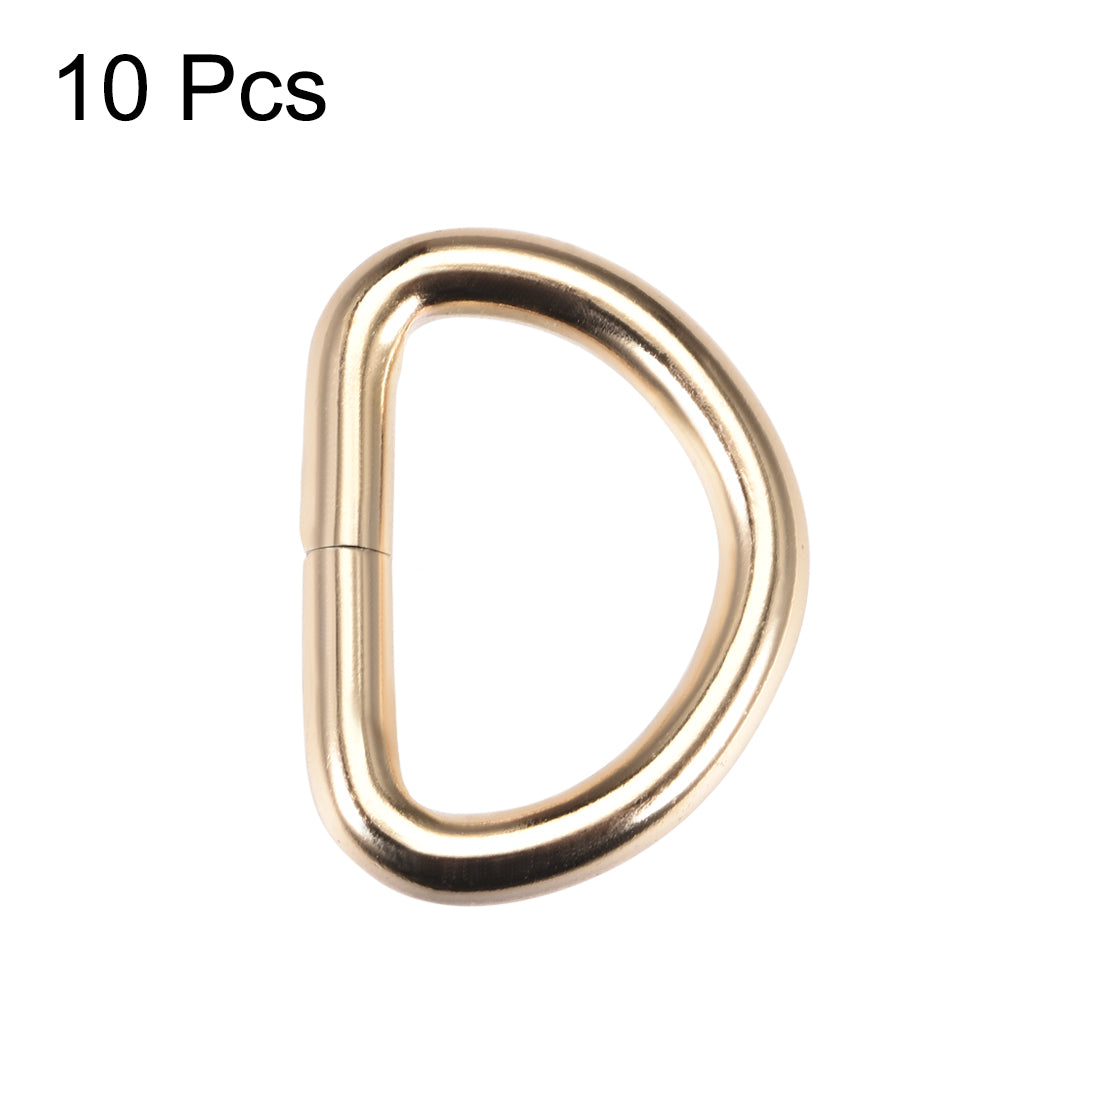 uxcell Uxcell 10 Pcs D Ring Buckle 1 Inch Metal Semi-Circular D-Rings Gold Tone for Hardware Bags Belts Craft DIY Accessories